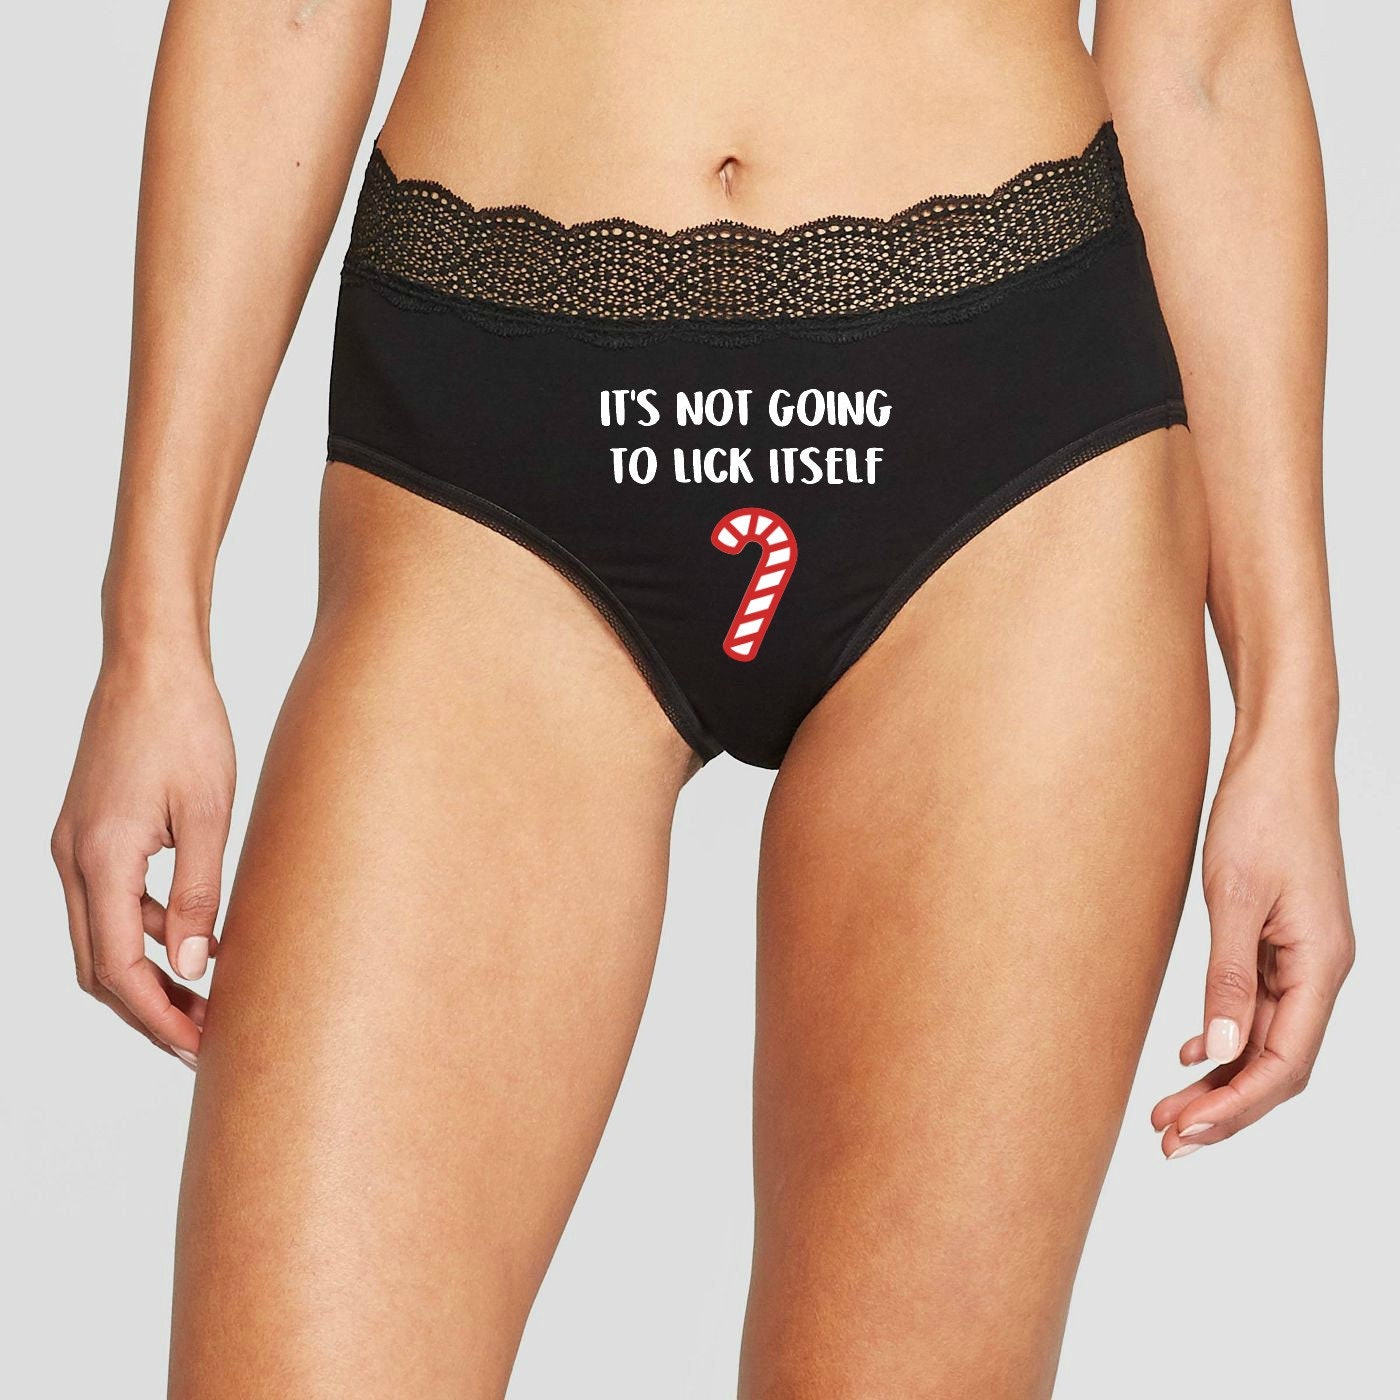 Couples Matching Christmas Underwear His and Hers Novelty Underwear Lick  Itself Funny Christmas Underwear Anniversary Gifts -  Canada